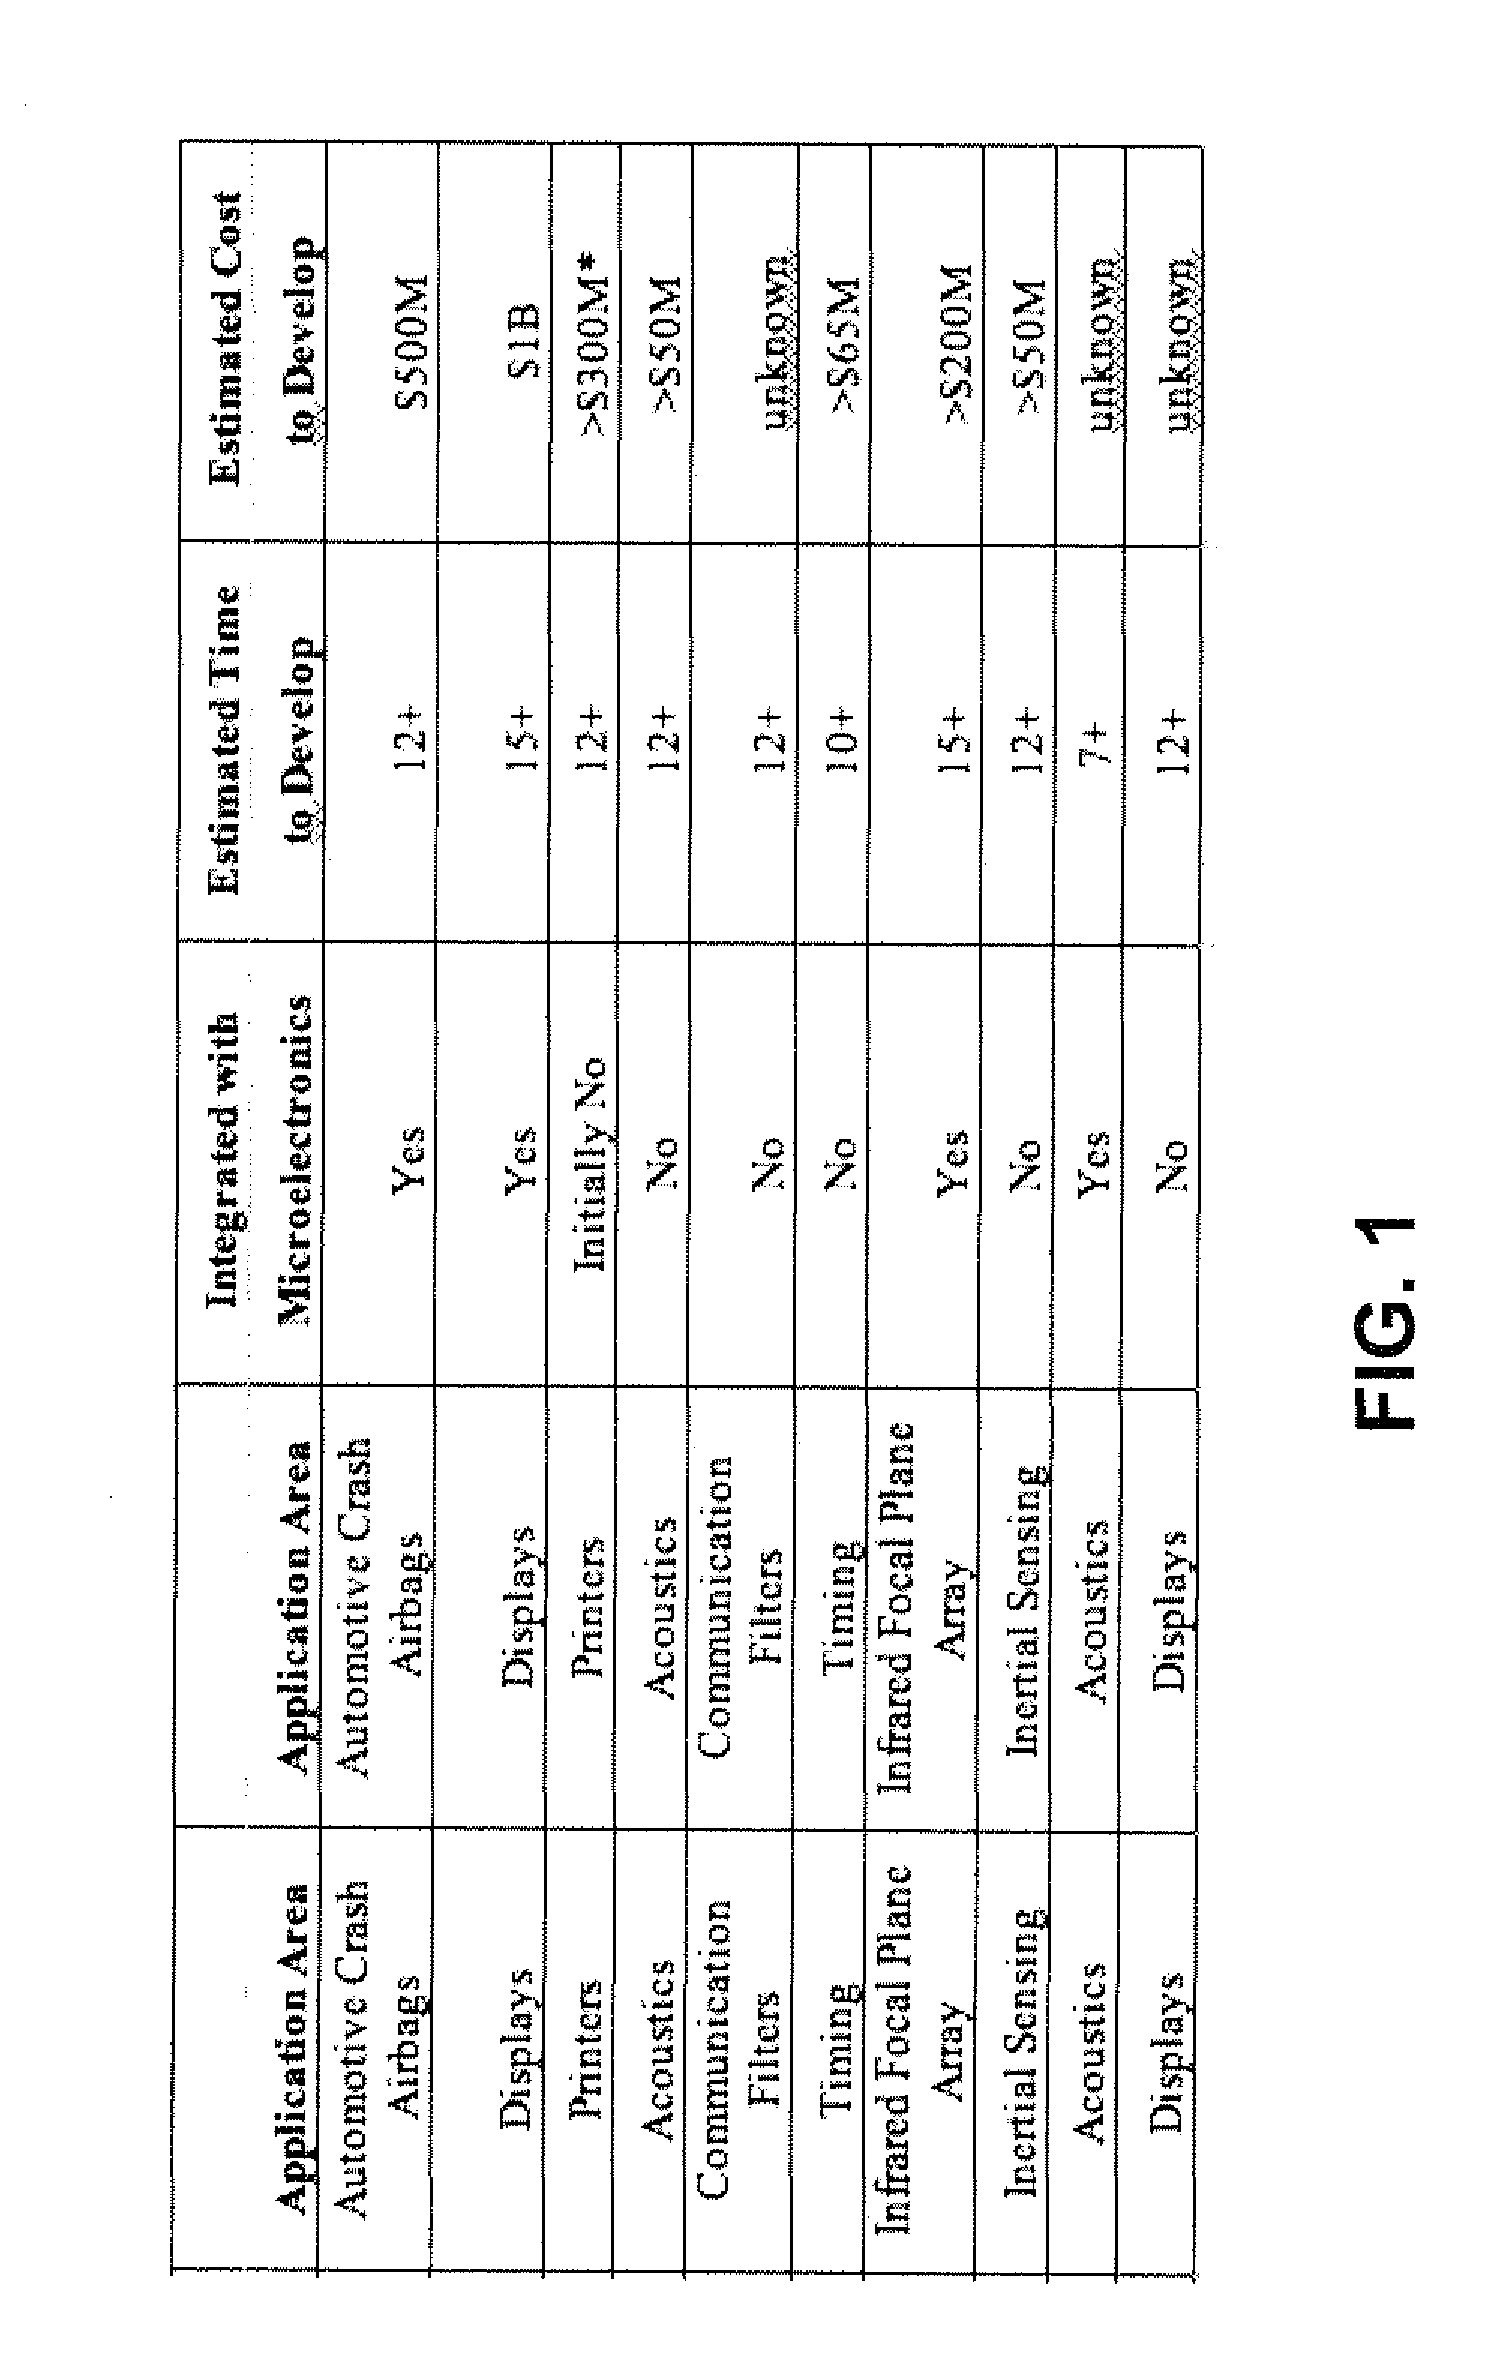 Method of fabricating mems, nems, photonic, micro- and nano-fabricated devices and systems